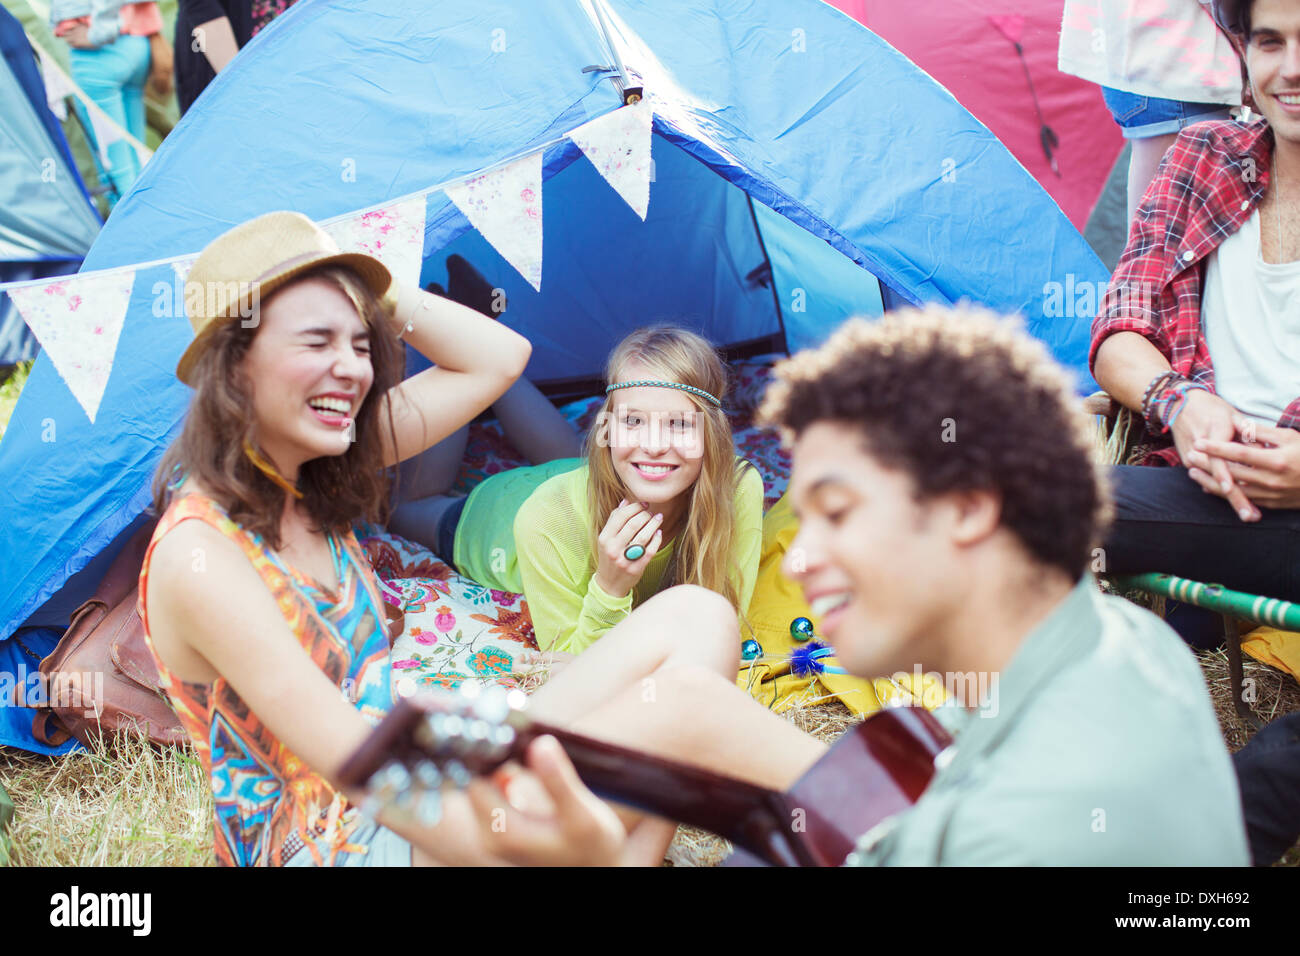 Friends hanging out at tent at music festival Stock Photo